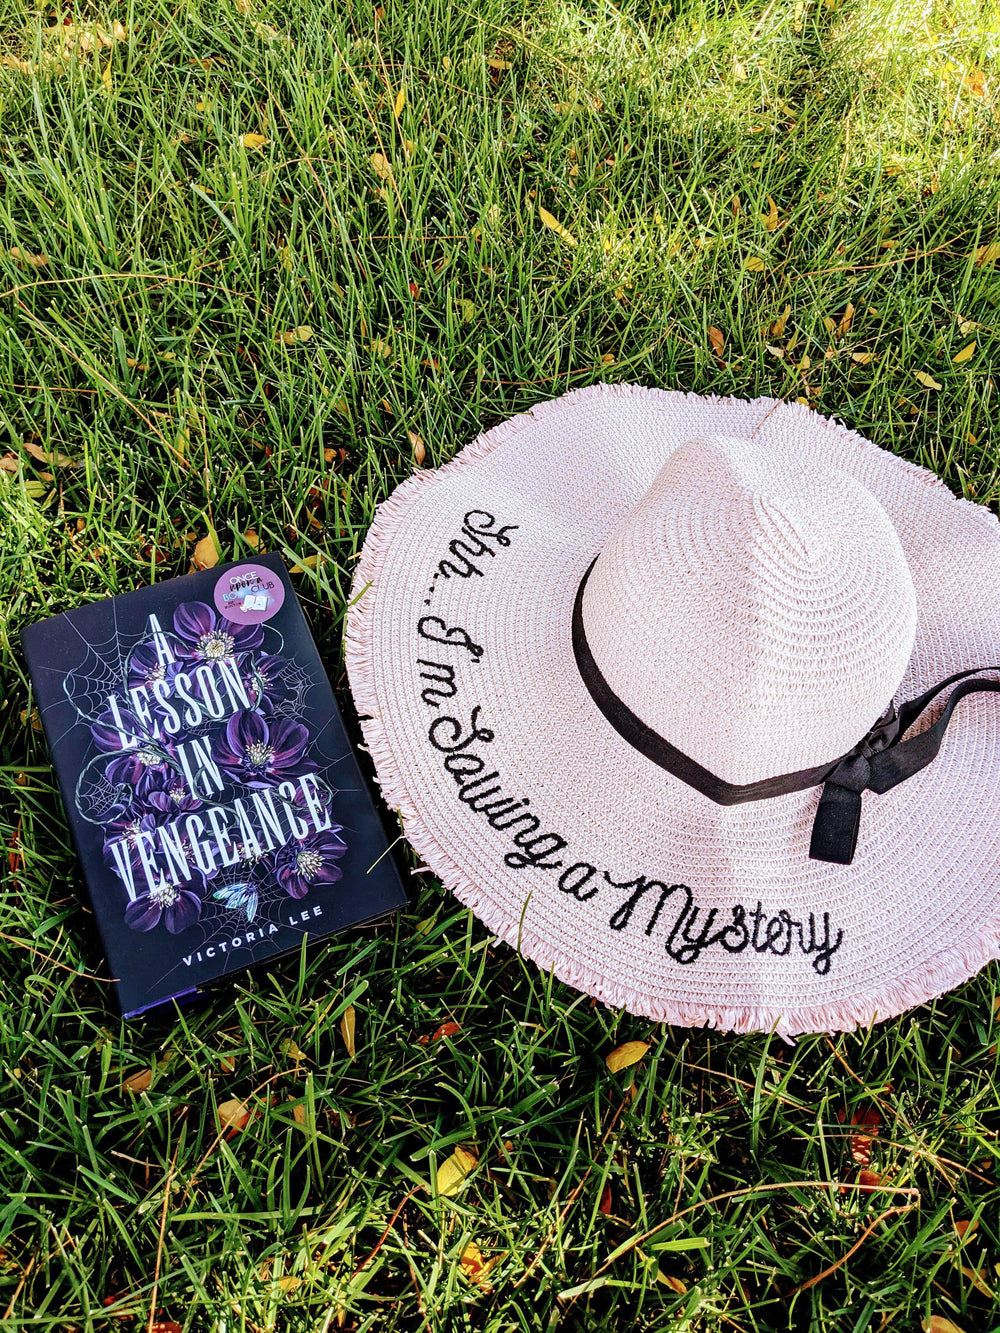 A hardcover edition of A Lesson in Vengeance is laying in the grass next to a blush pink sun hat featuring the words "Shh...I'm Solving a Mystery" embroidered in black thread, finished with a black ribbon